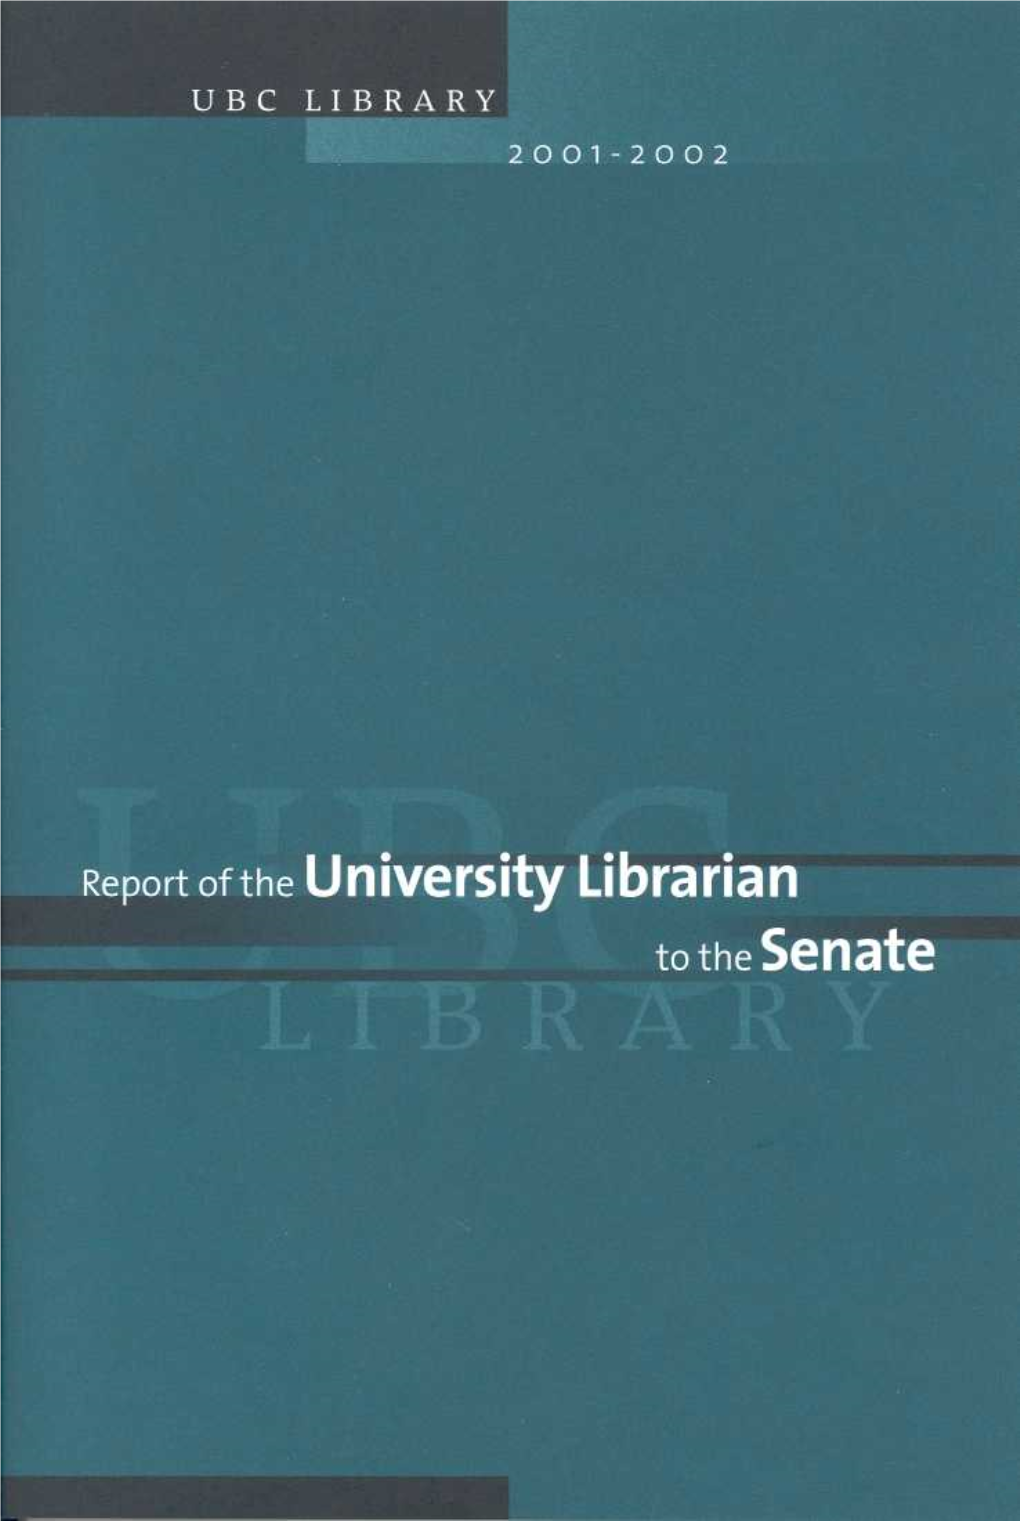 Report of the University Librarian to the Senate CONTENTS